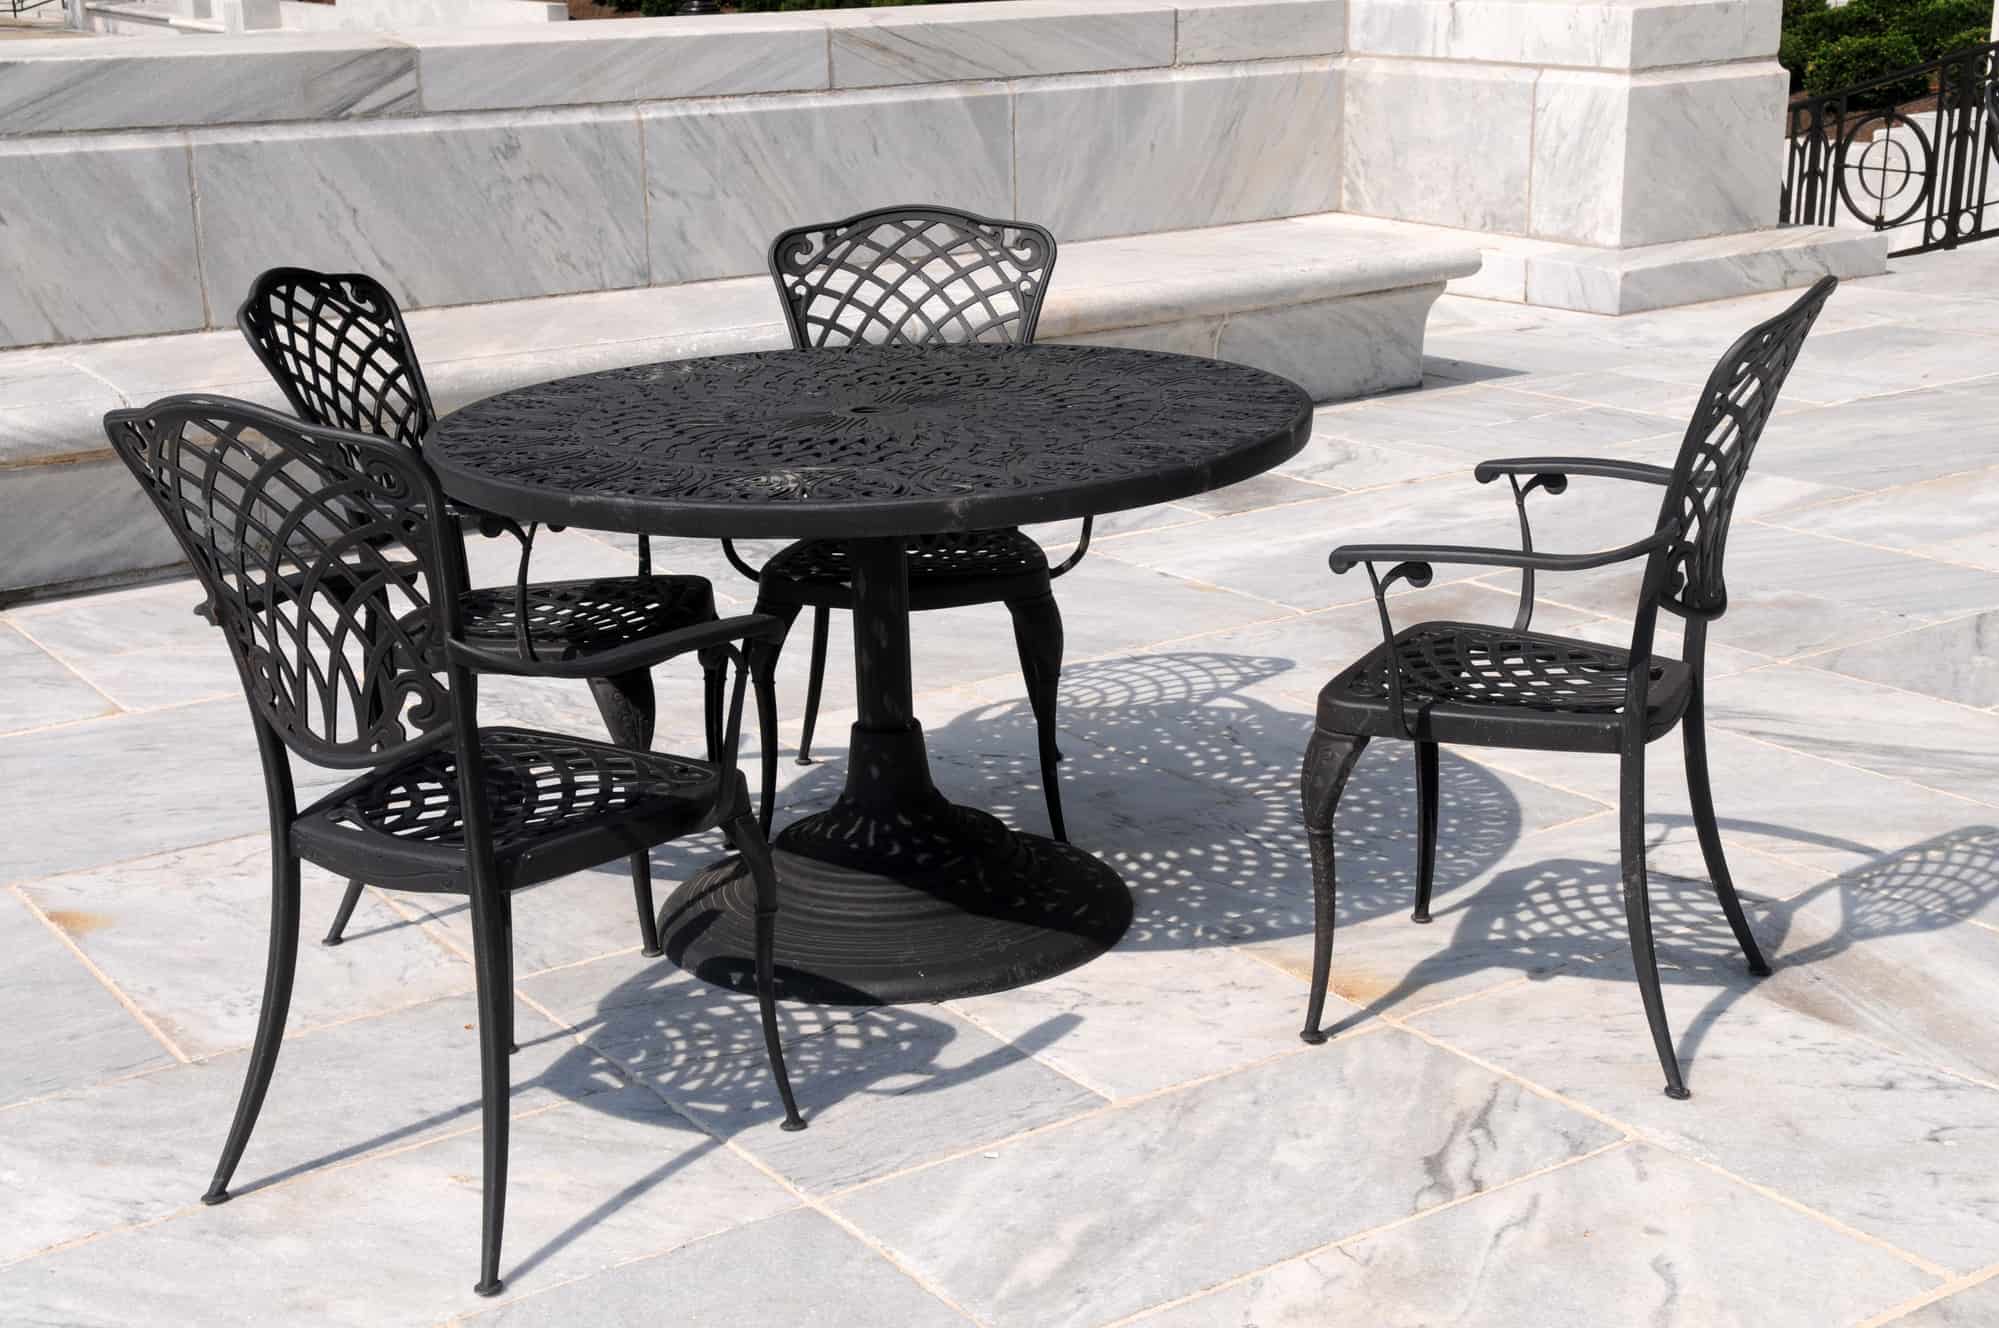 Everything You Ever Wanted to Know About Wrought Iron Patio Furniture